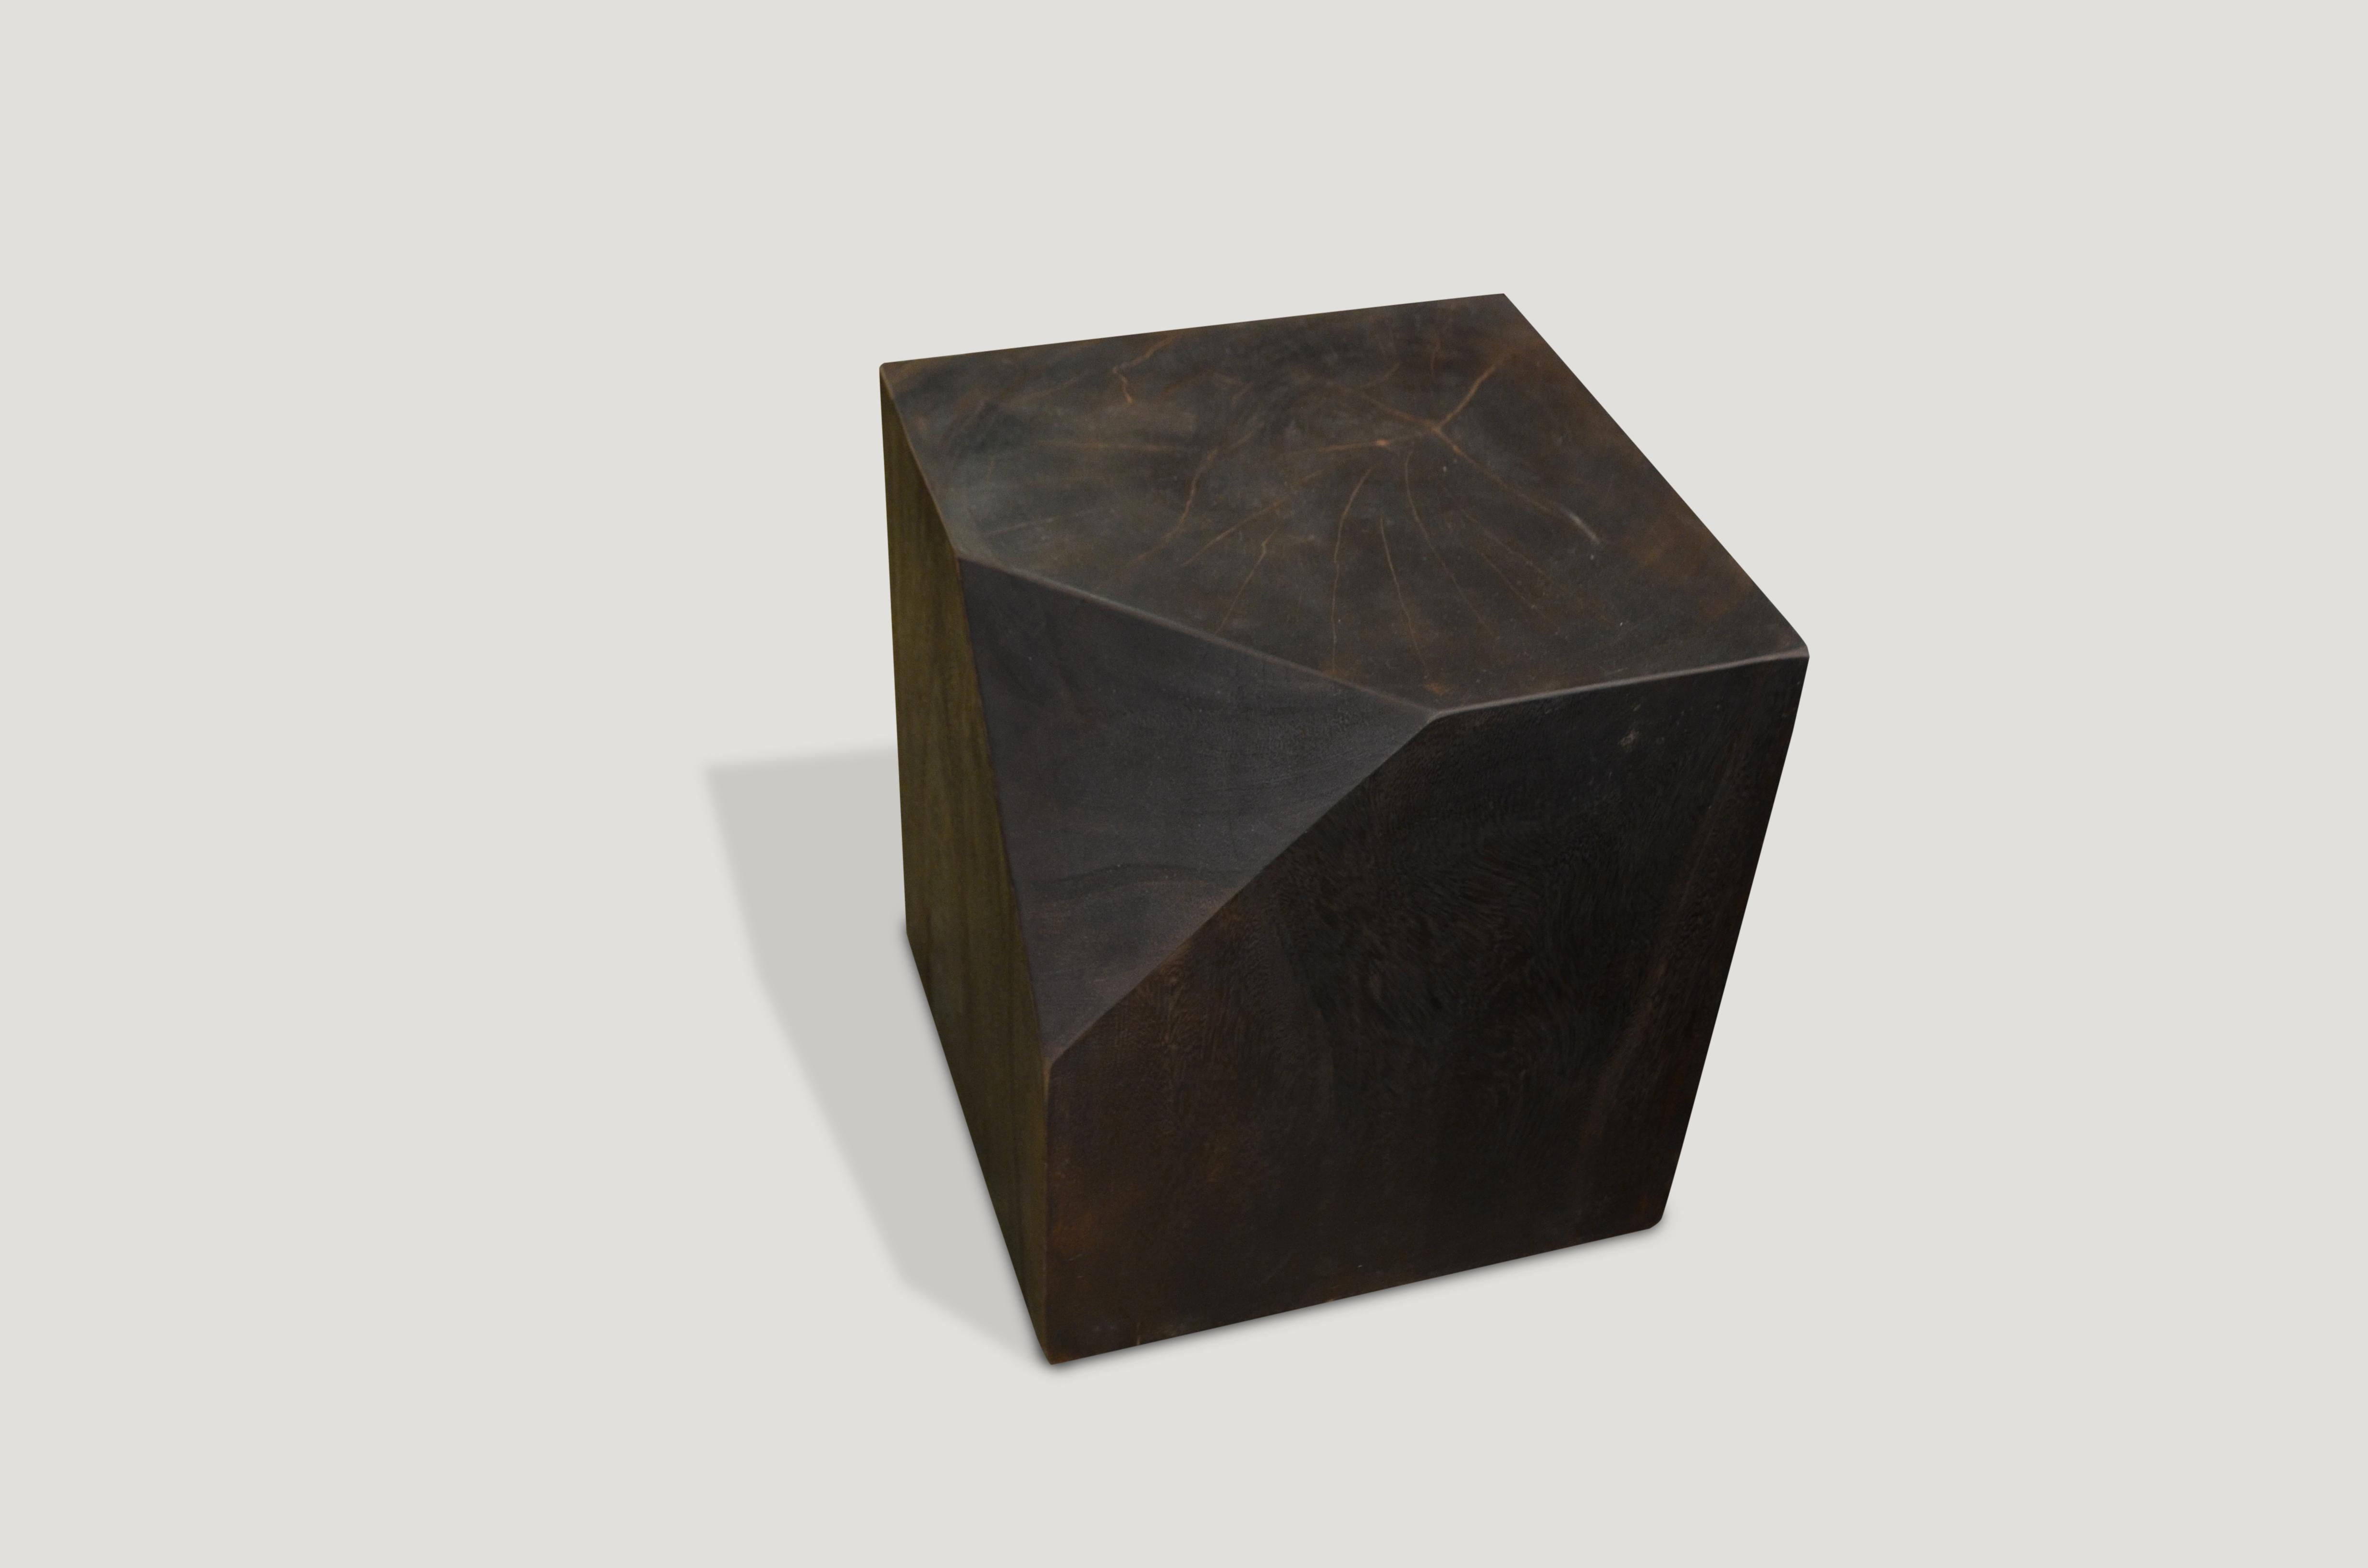 Single burnt suar wood side table, sanded and sealed with a smooth finish. We have a collection that work well together. Please inquire. The price reflects one.

Andrianna Shamaris. The Leader In Modern Organic Design.
 